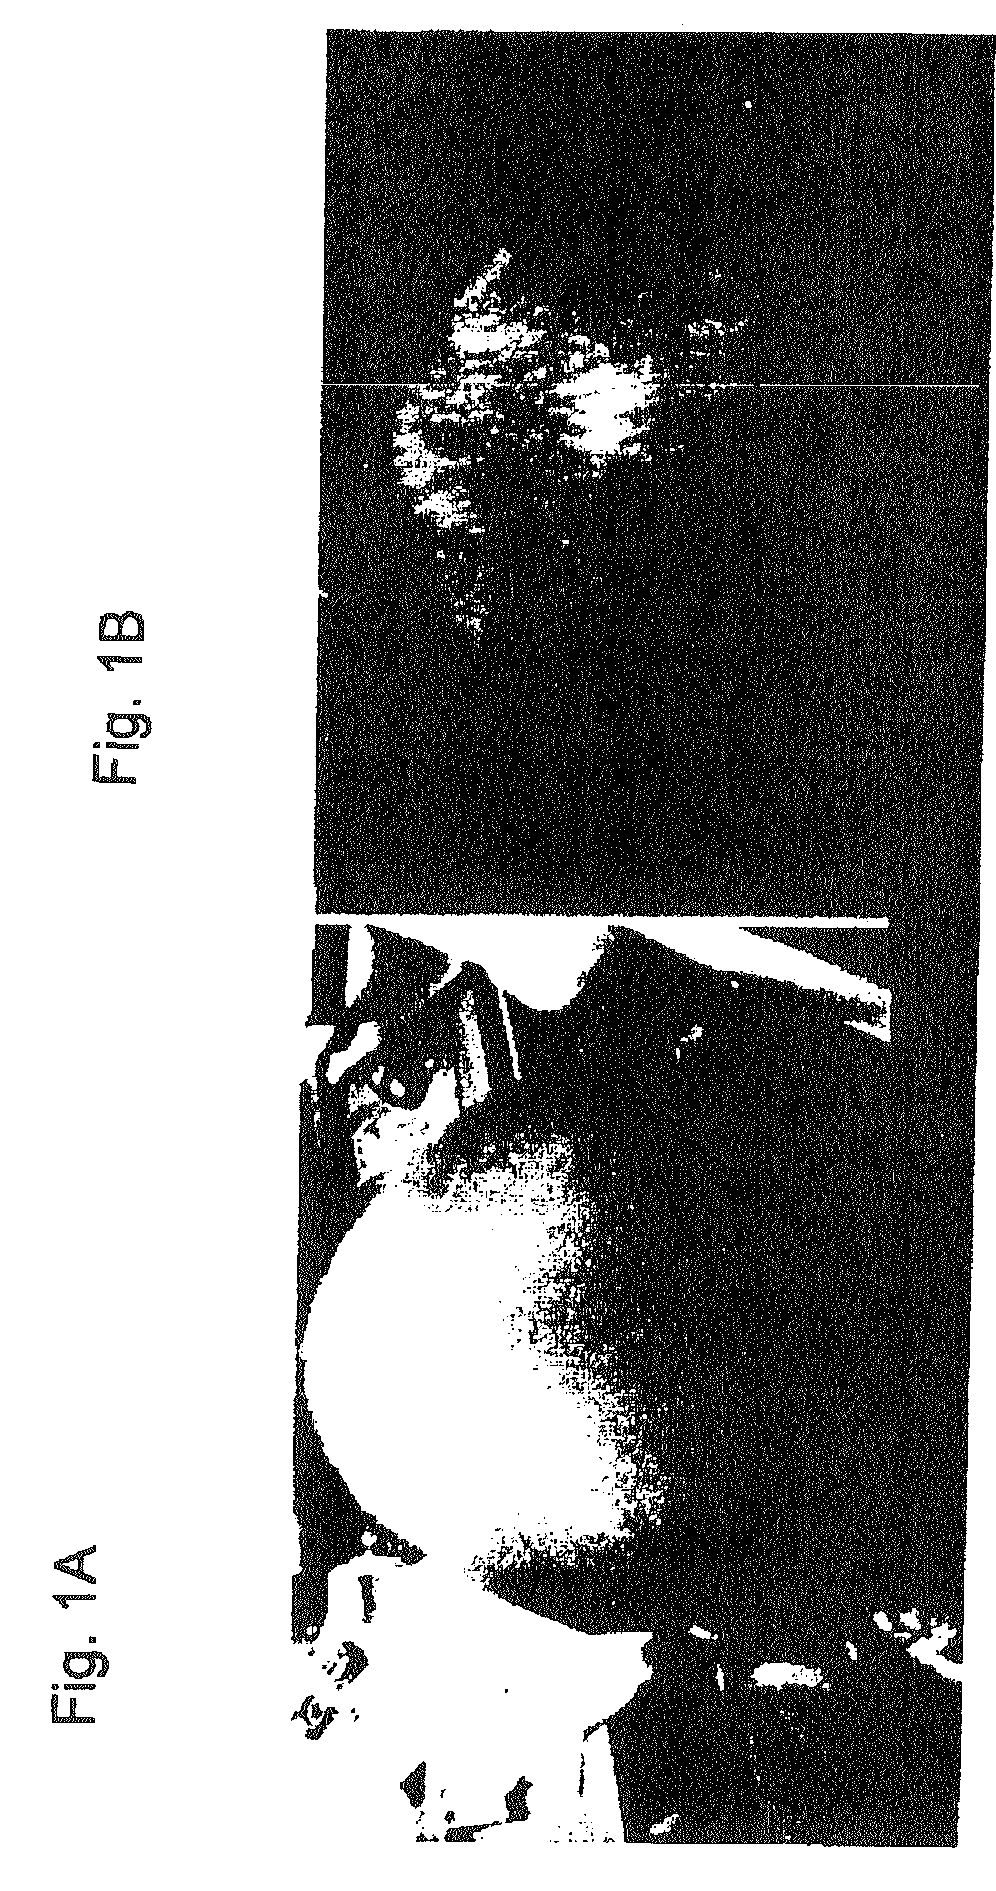 System and method for promoting hair growth and improving hair and scalp health